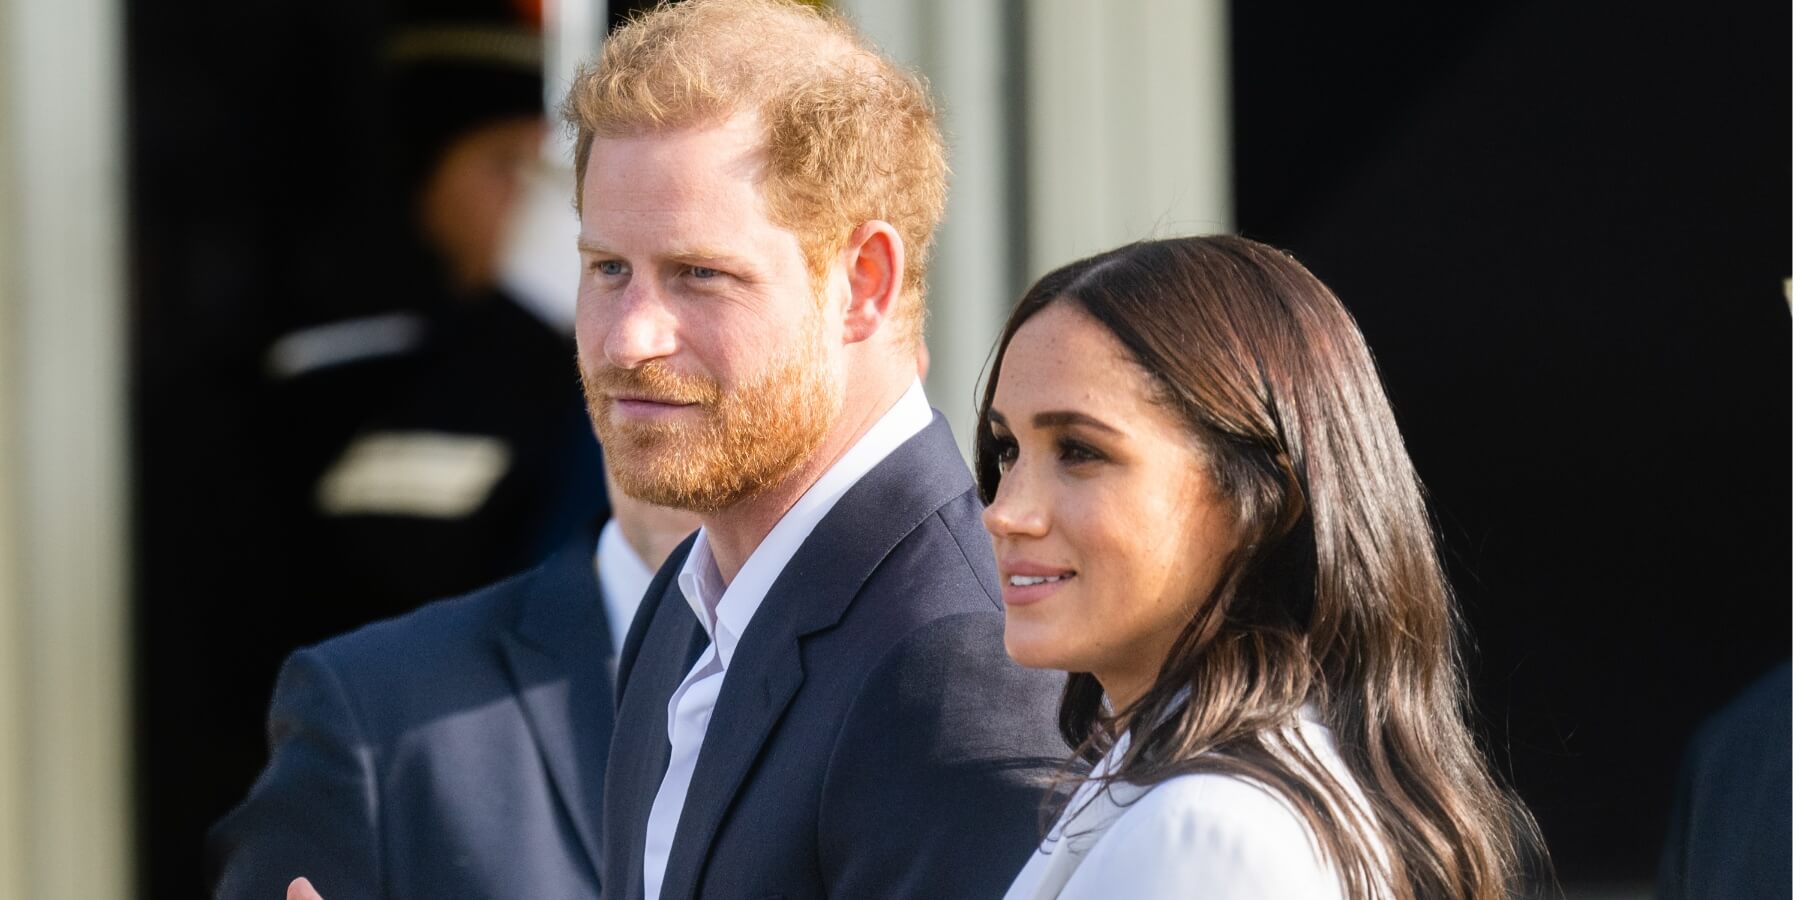 Prince Harry and Meghan Markle attend a reception for friends and family of competitors of the Invictus Games at Nations Home at Zuiderpark on April 15, 2022 in The Hague, Netherlands.